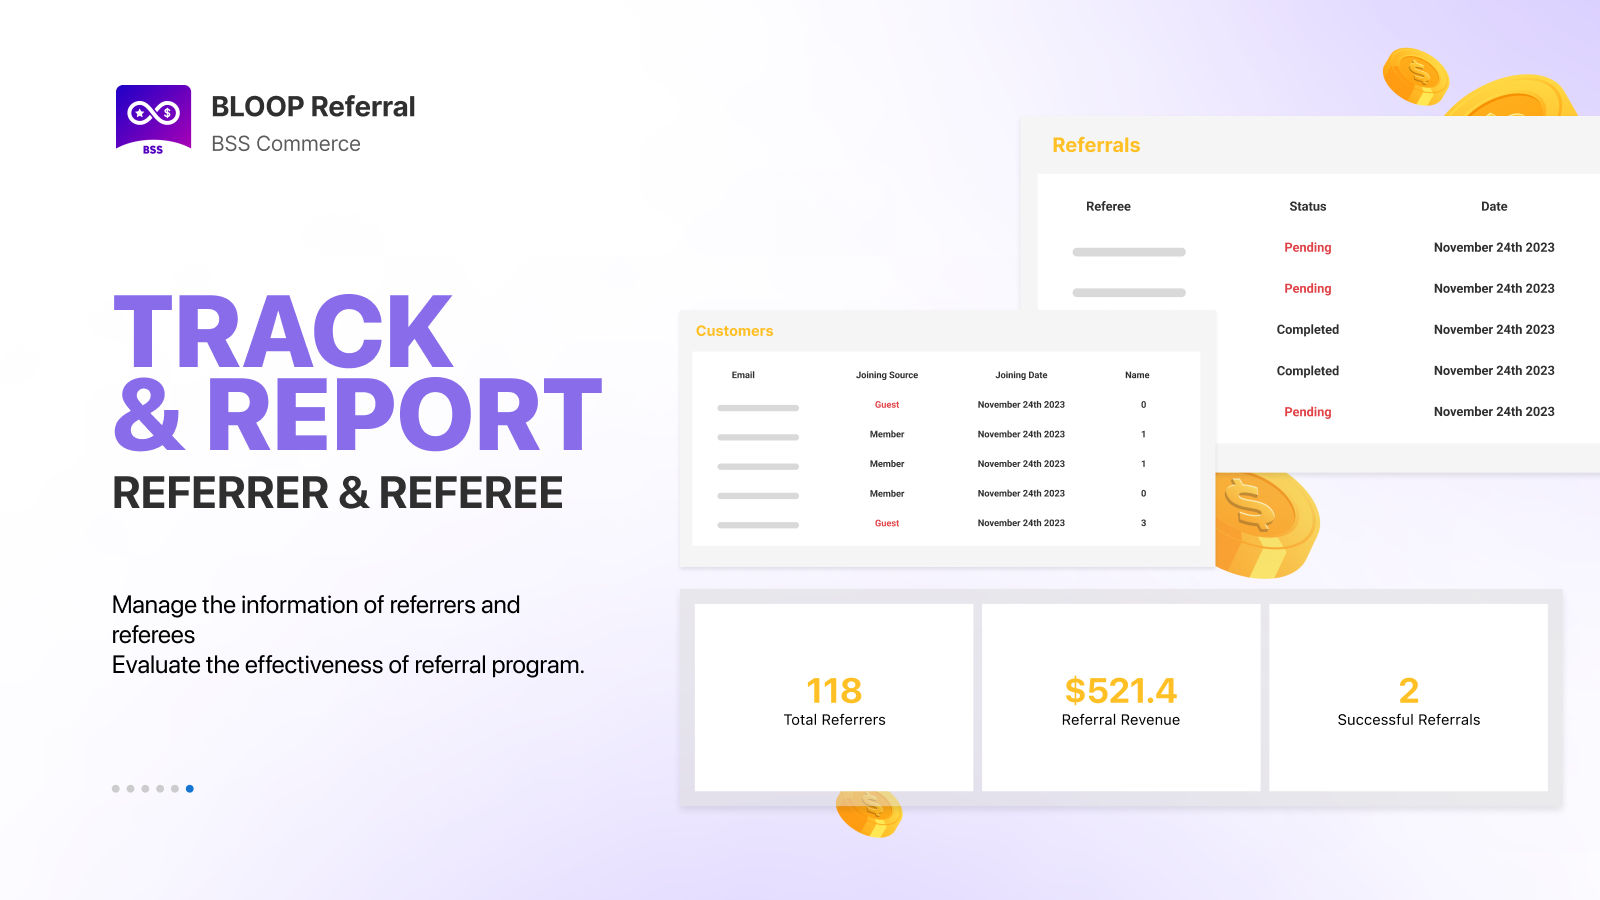 Track  & report referrers and referees - Evaluate effectiveness